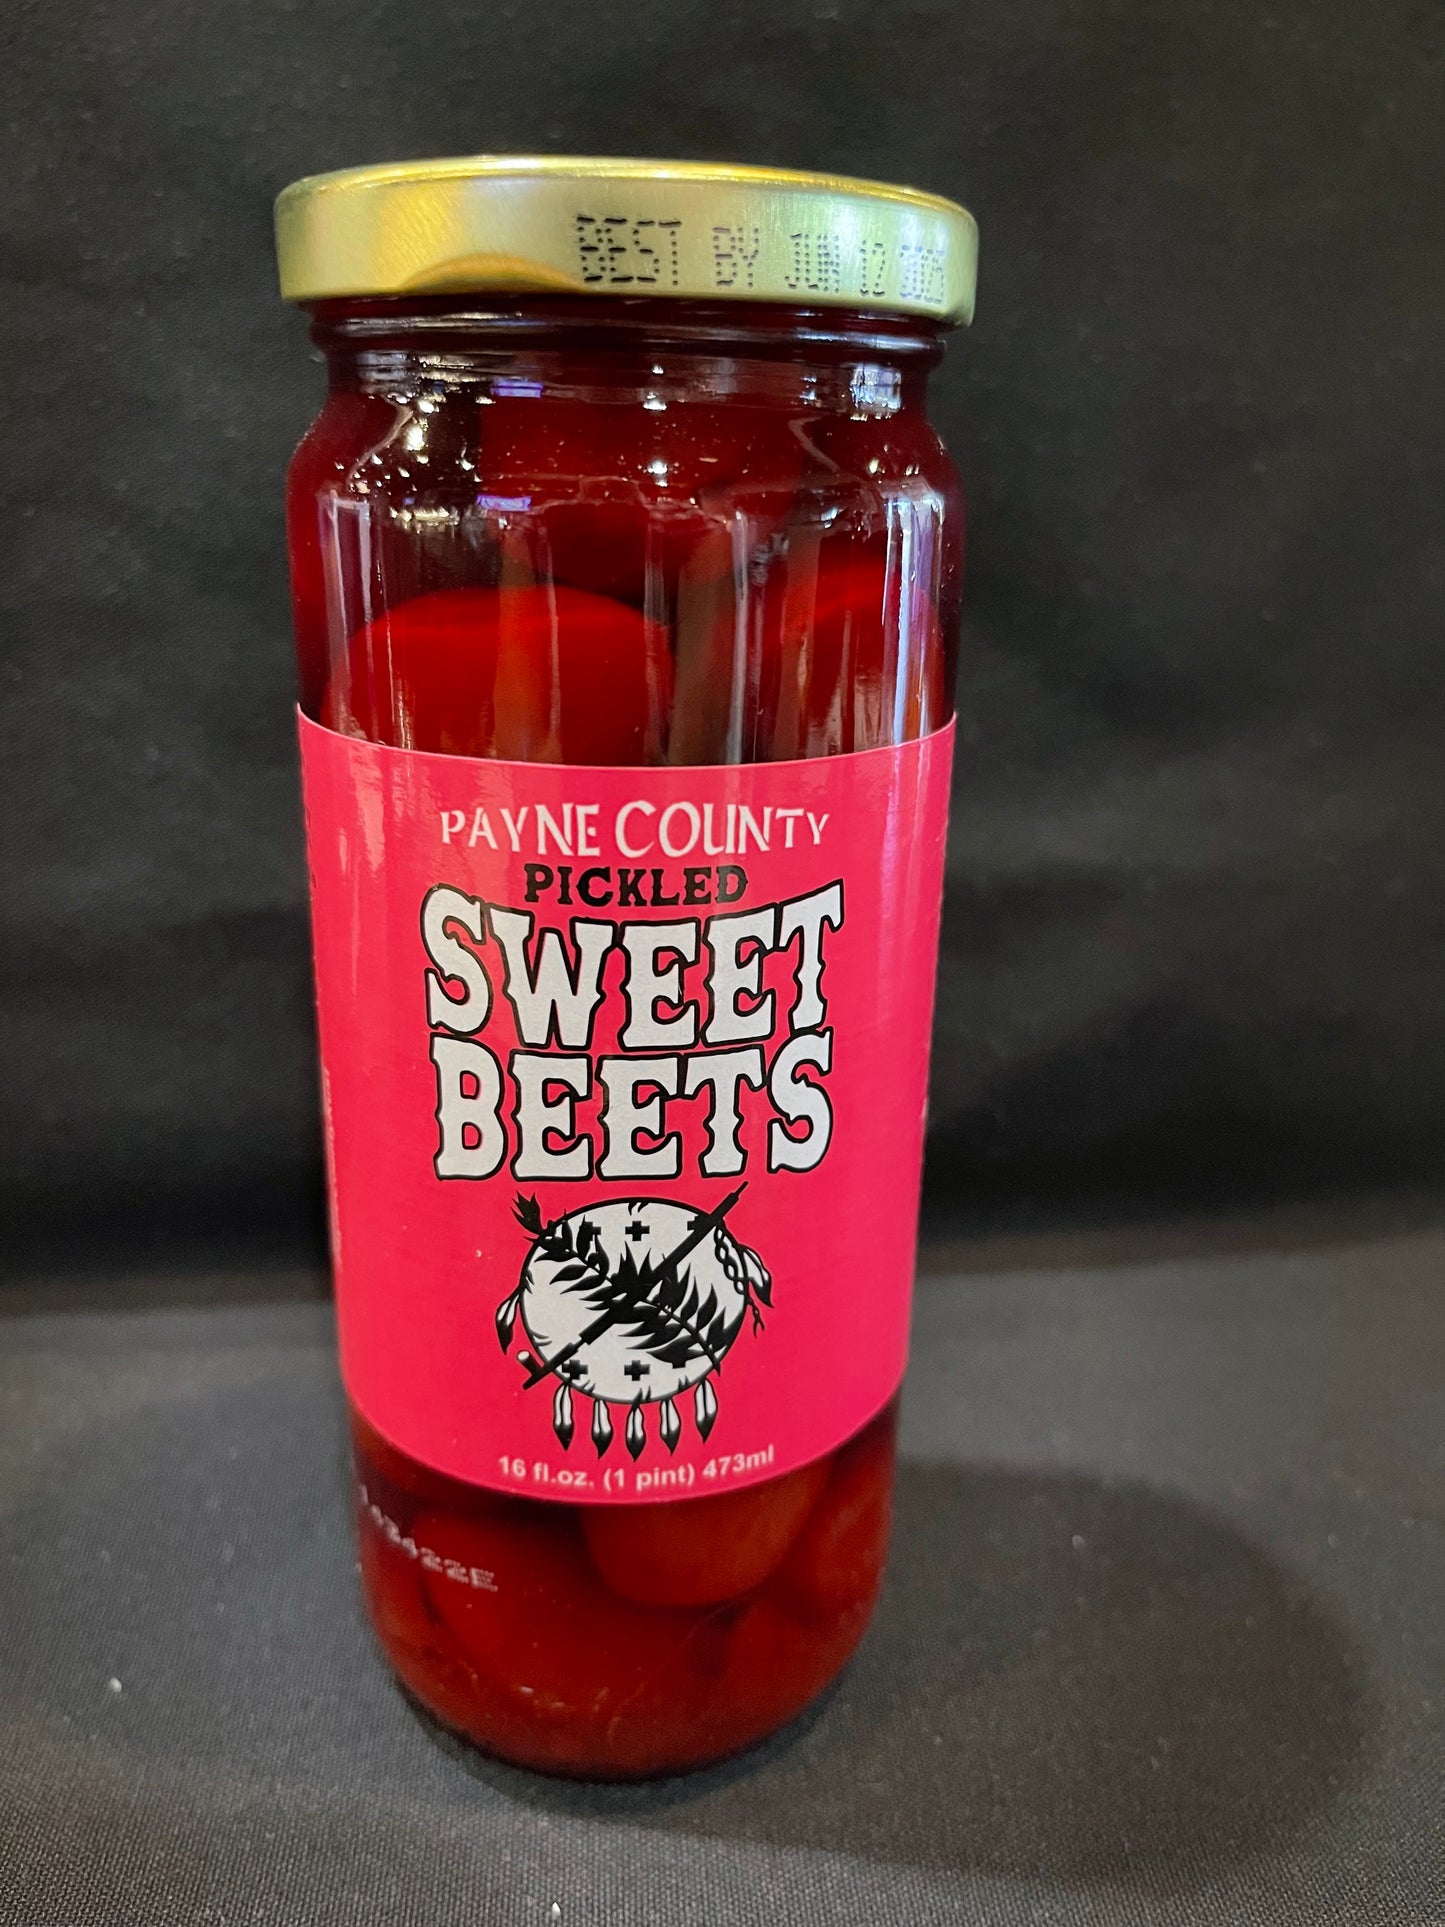 Payne County Pickled Sweet Beets